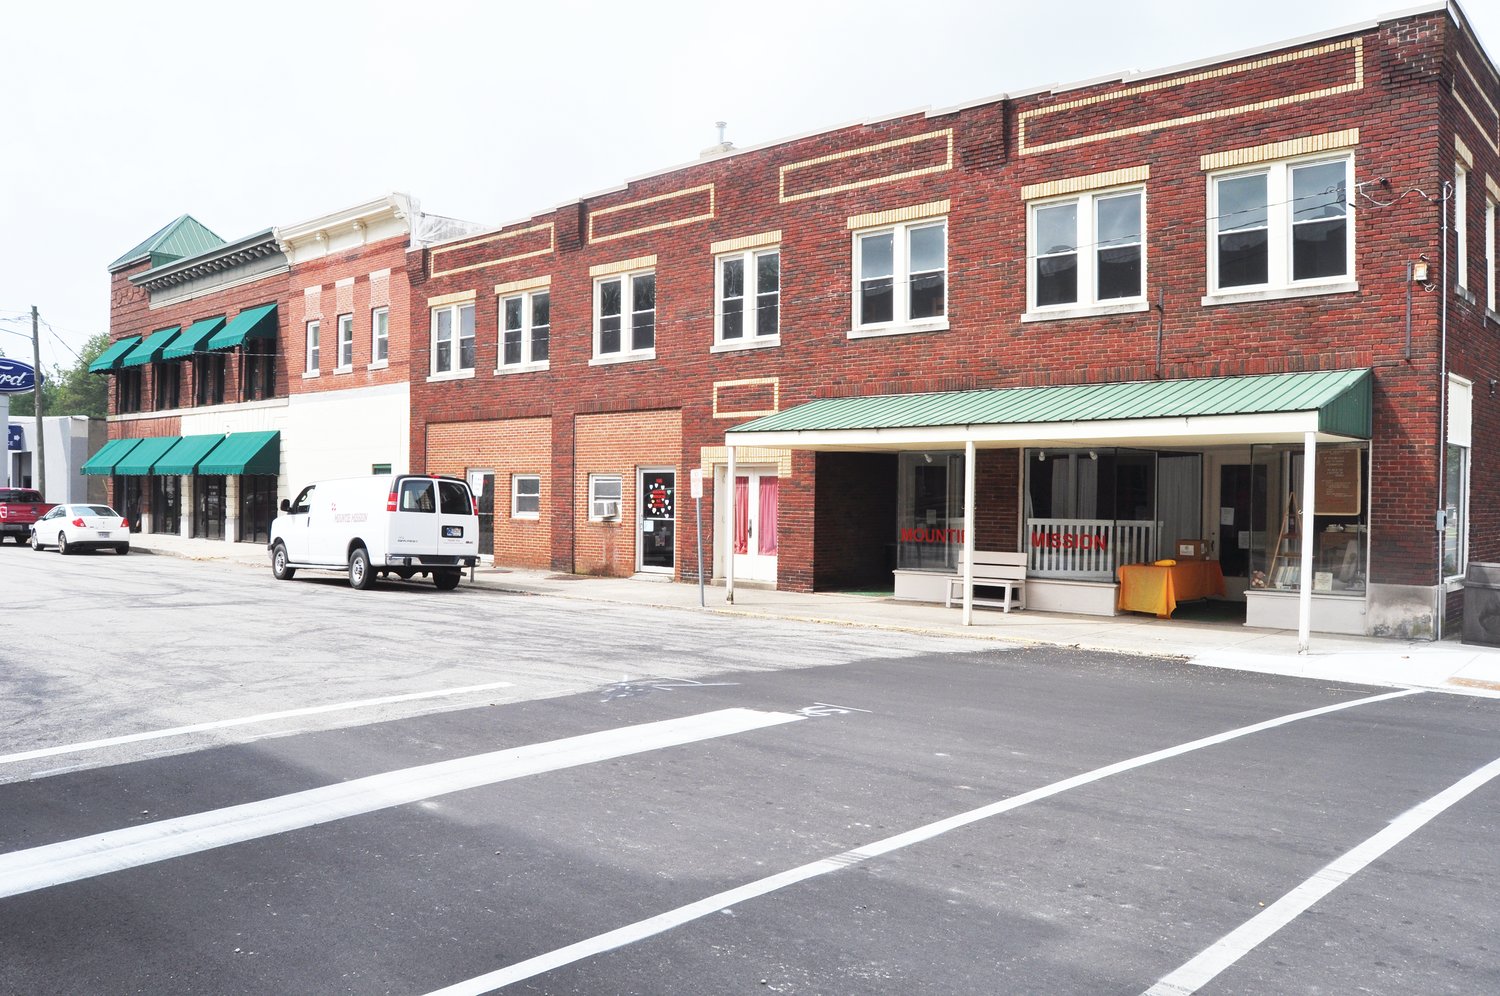 Mountie Mission, which operates from the corner of Washington and Main streets in downtown Ladoga, plans to expand into the building with the green awnings.